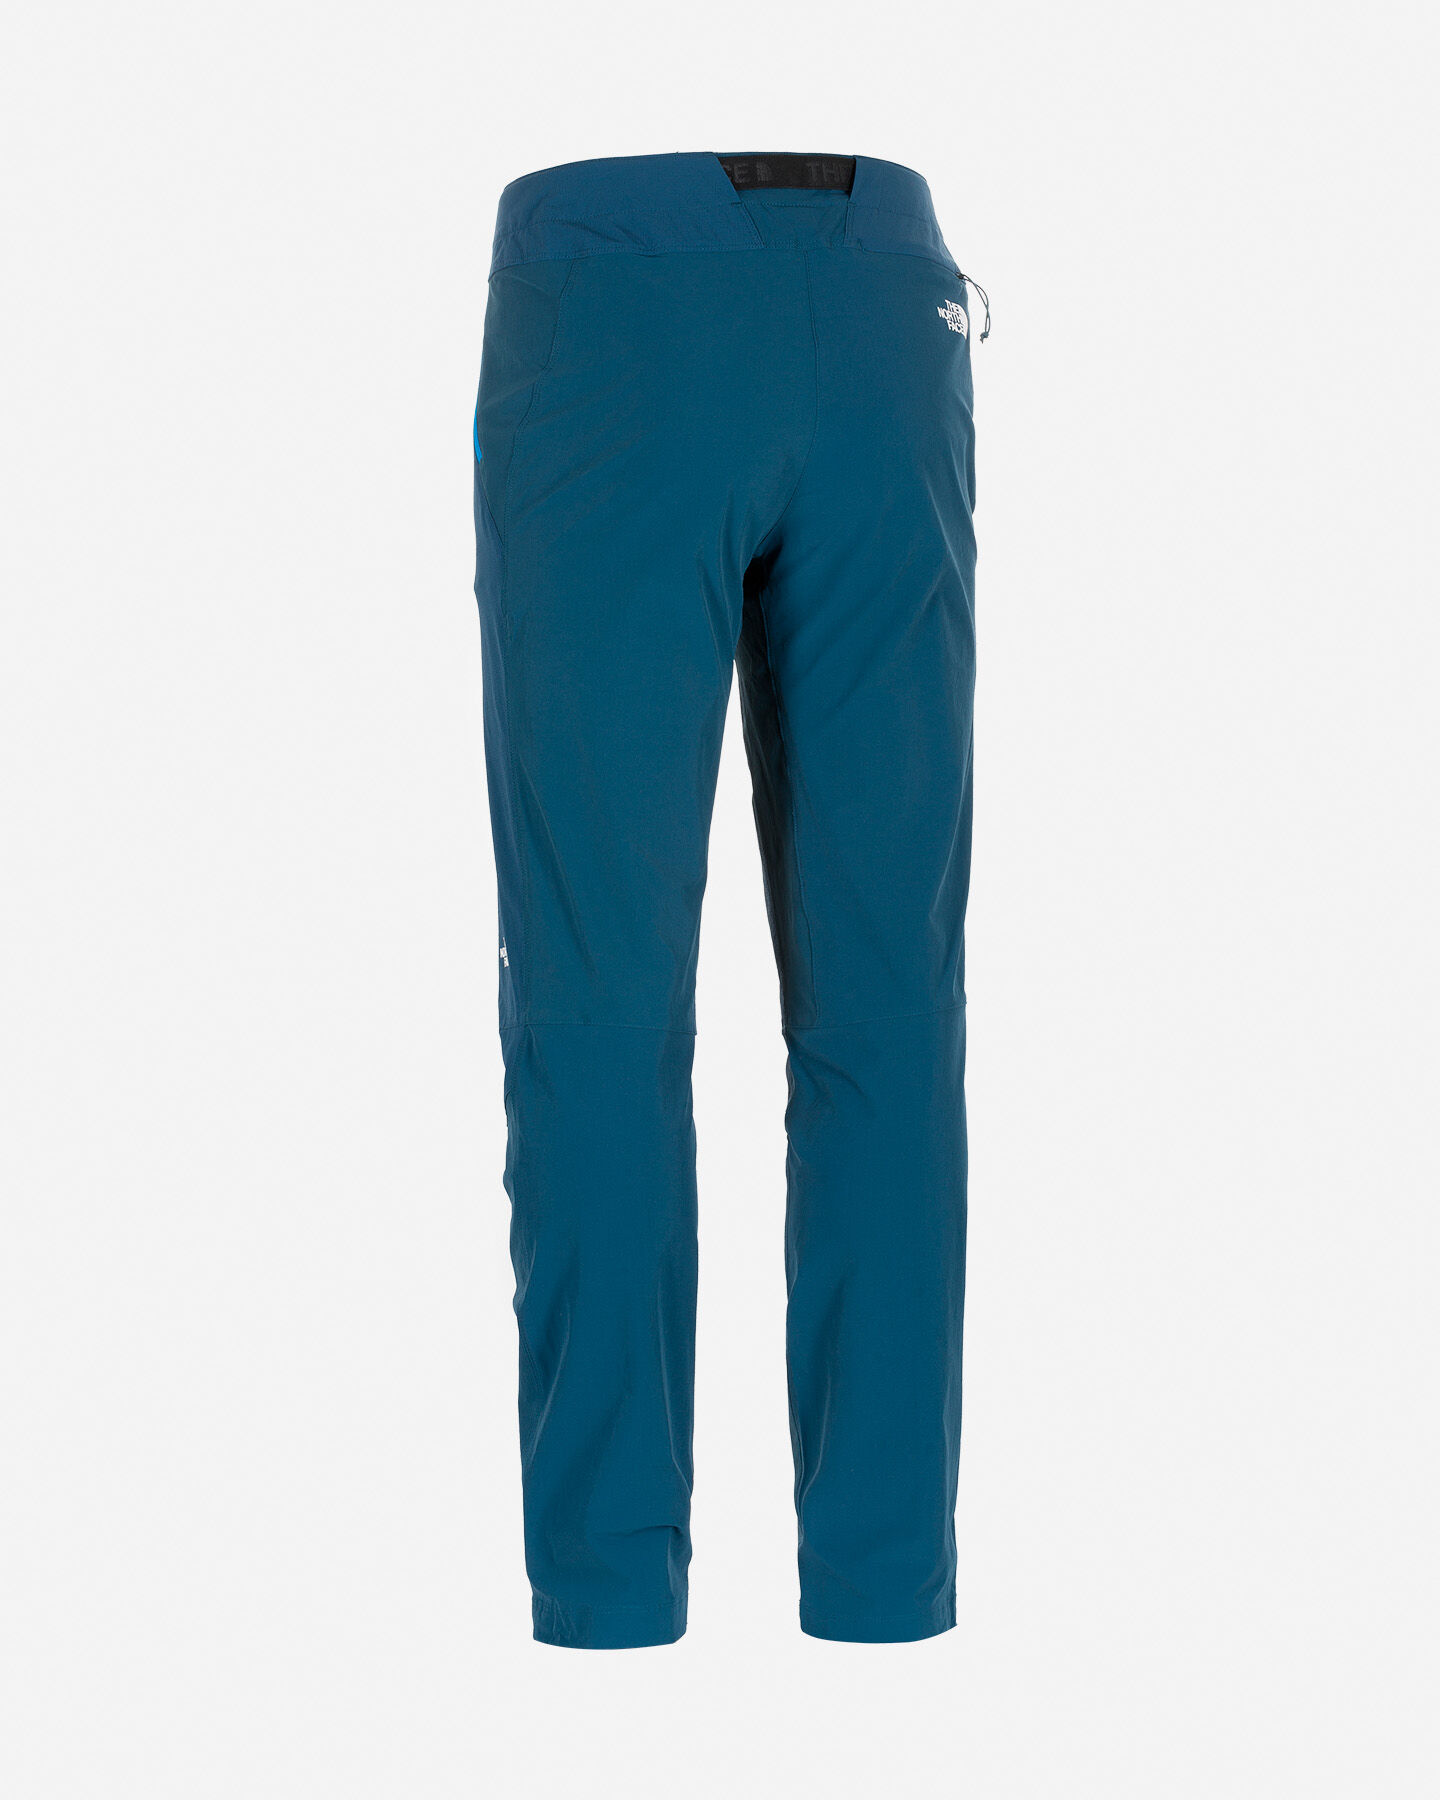  Pantalone outdoor THE NORTH FACE SPEEDLIGHT II WING TEAL M S5184167|N4L|REG28 scatto 1